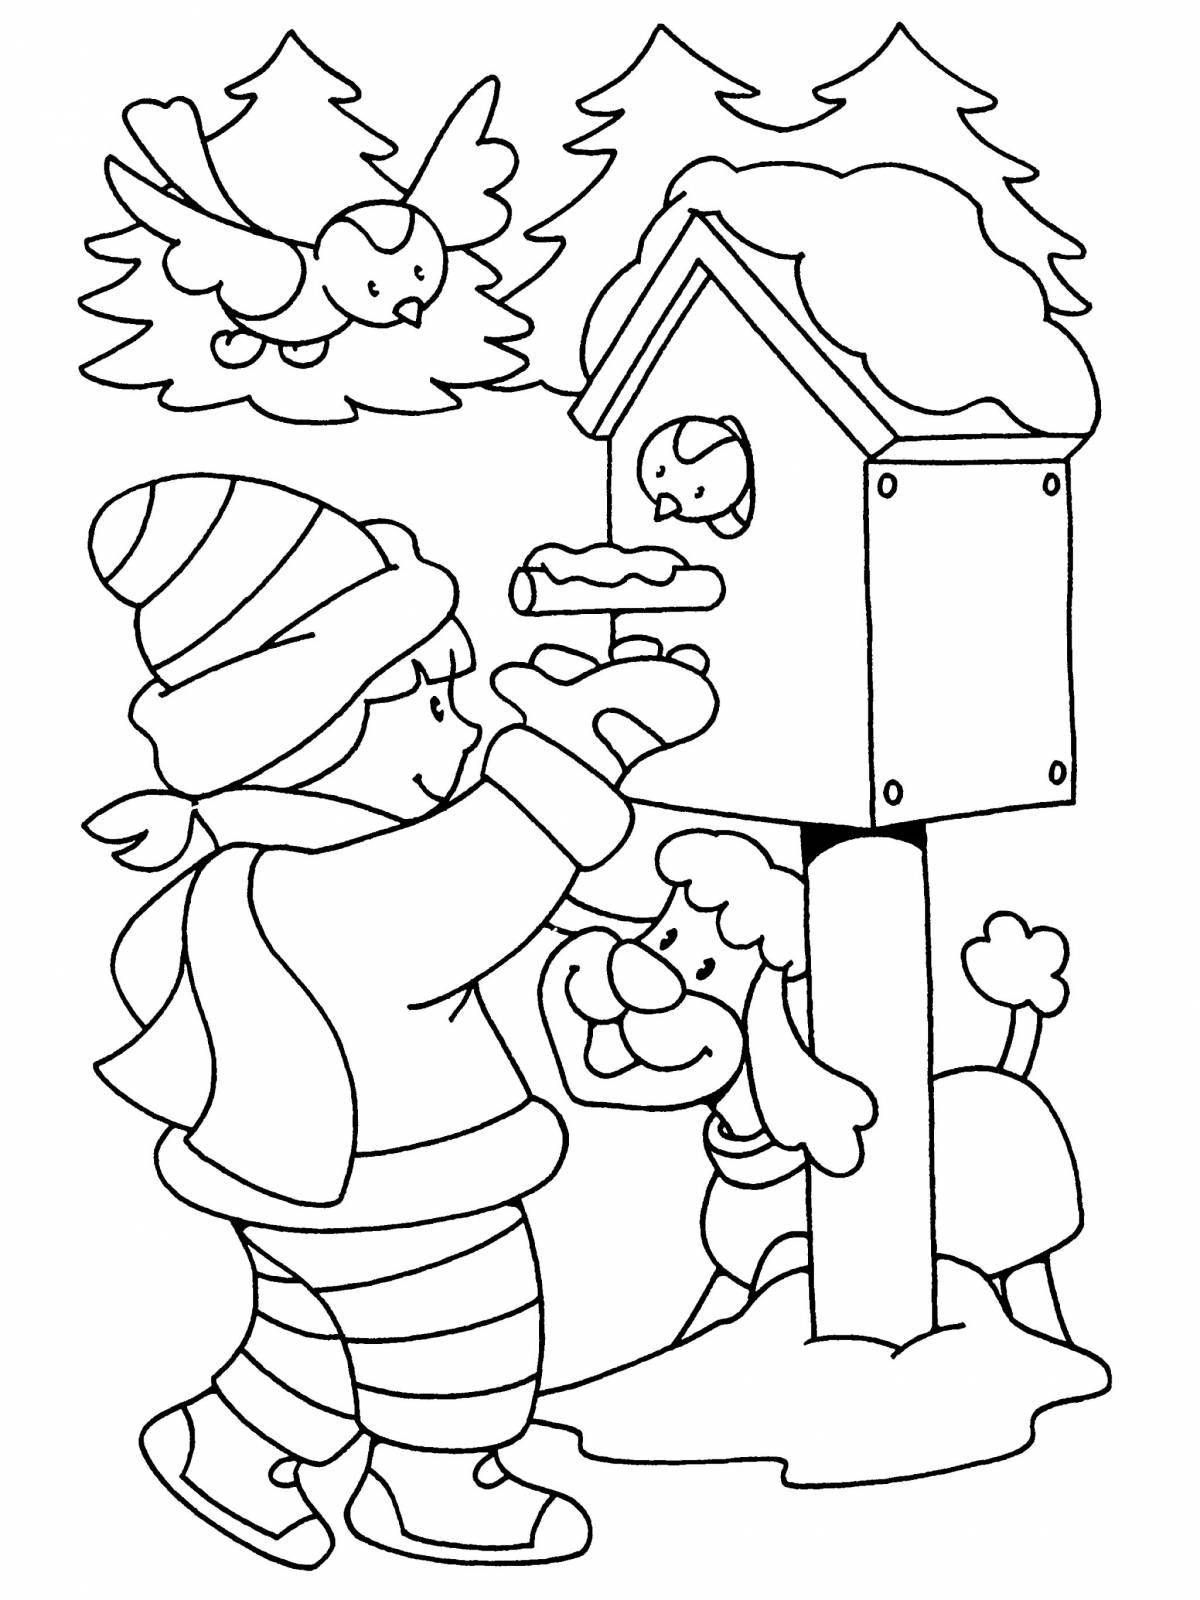 Shiny winter birds coloring book for 6-7 year olds